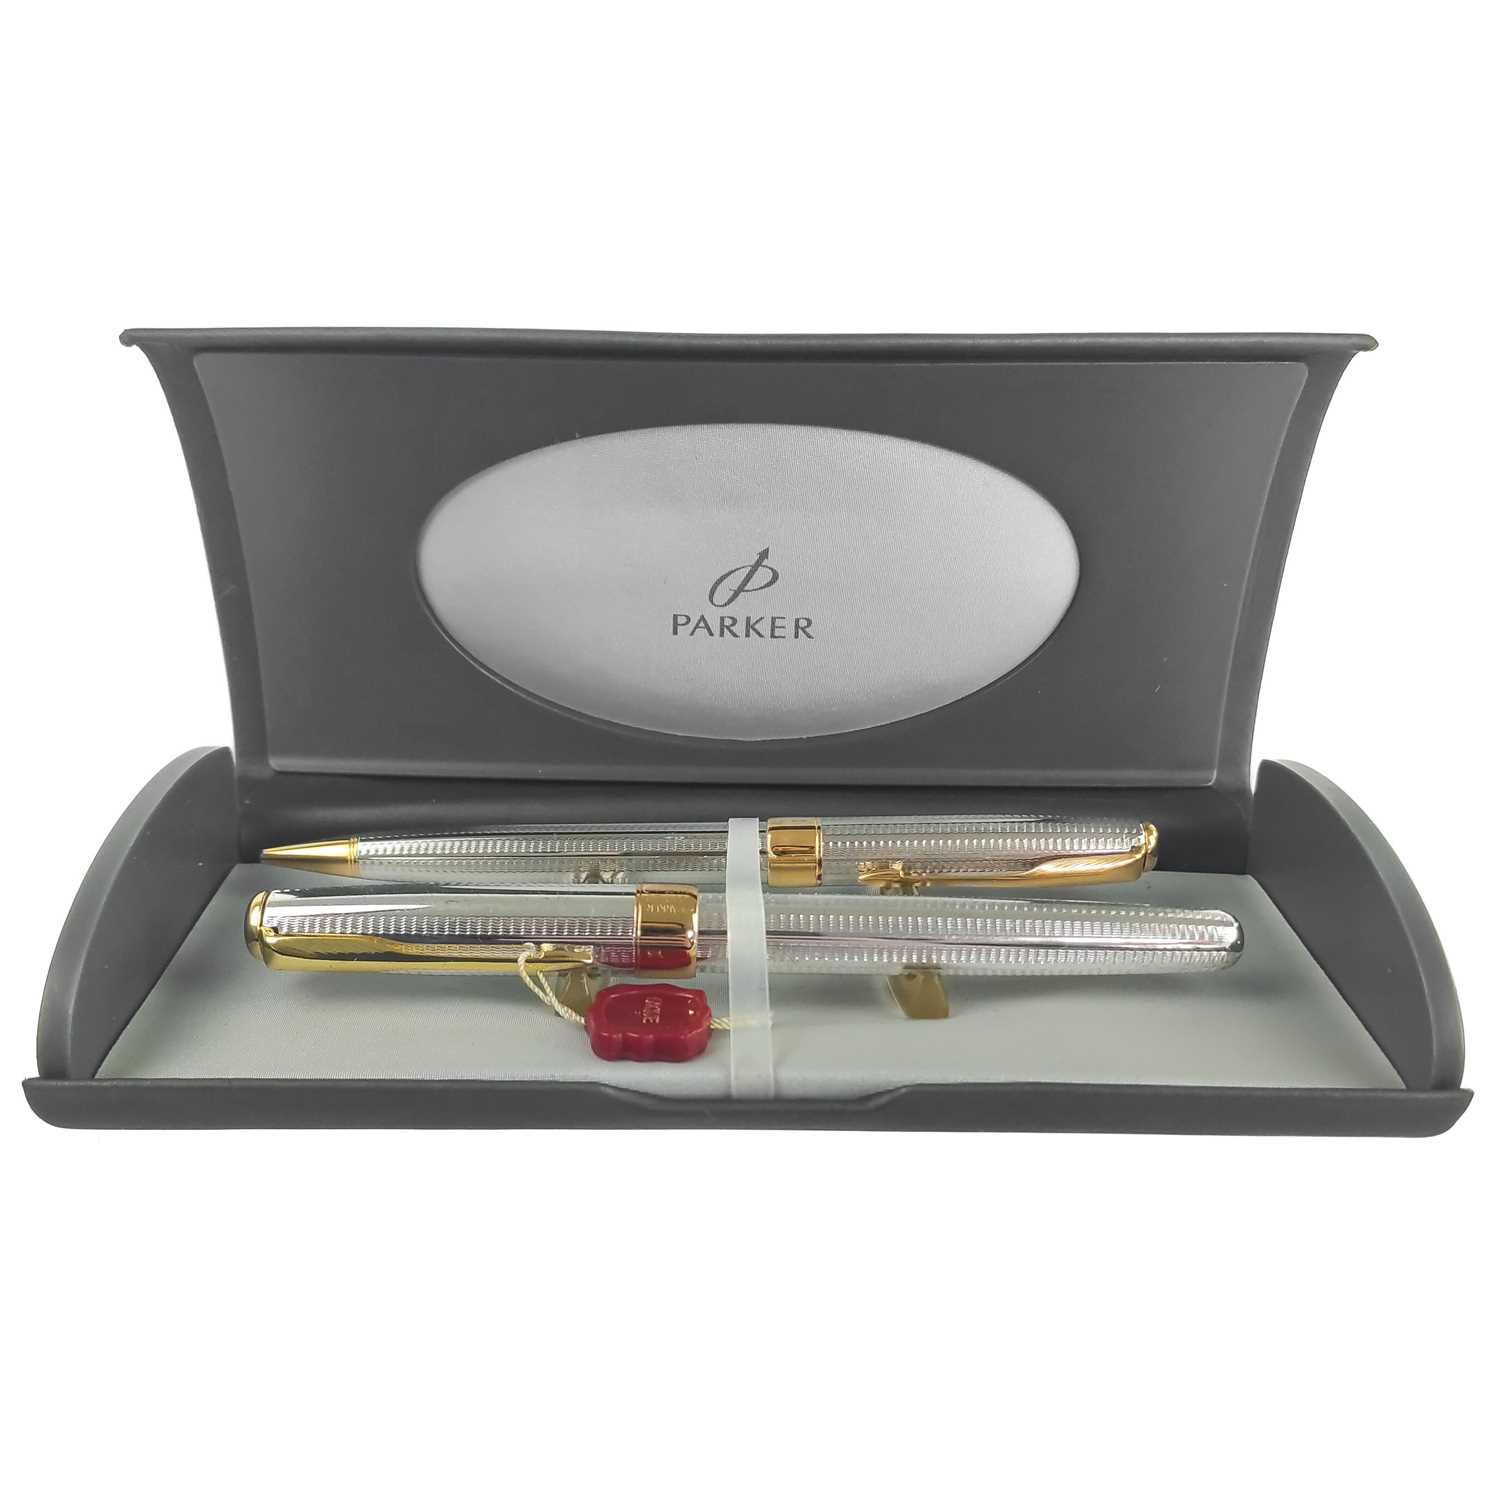 A Parker Sonnet fountain pen with 18k gold nib. - Image 4 of 6